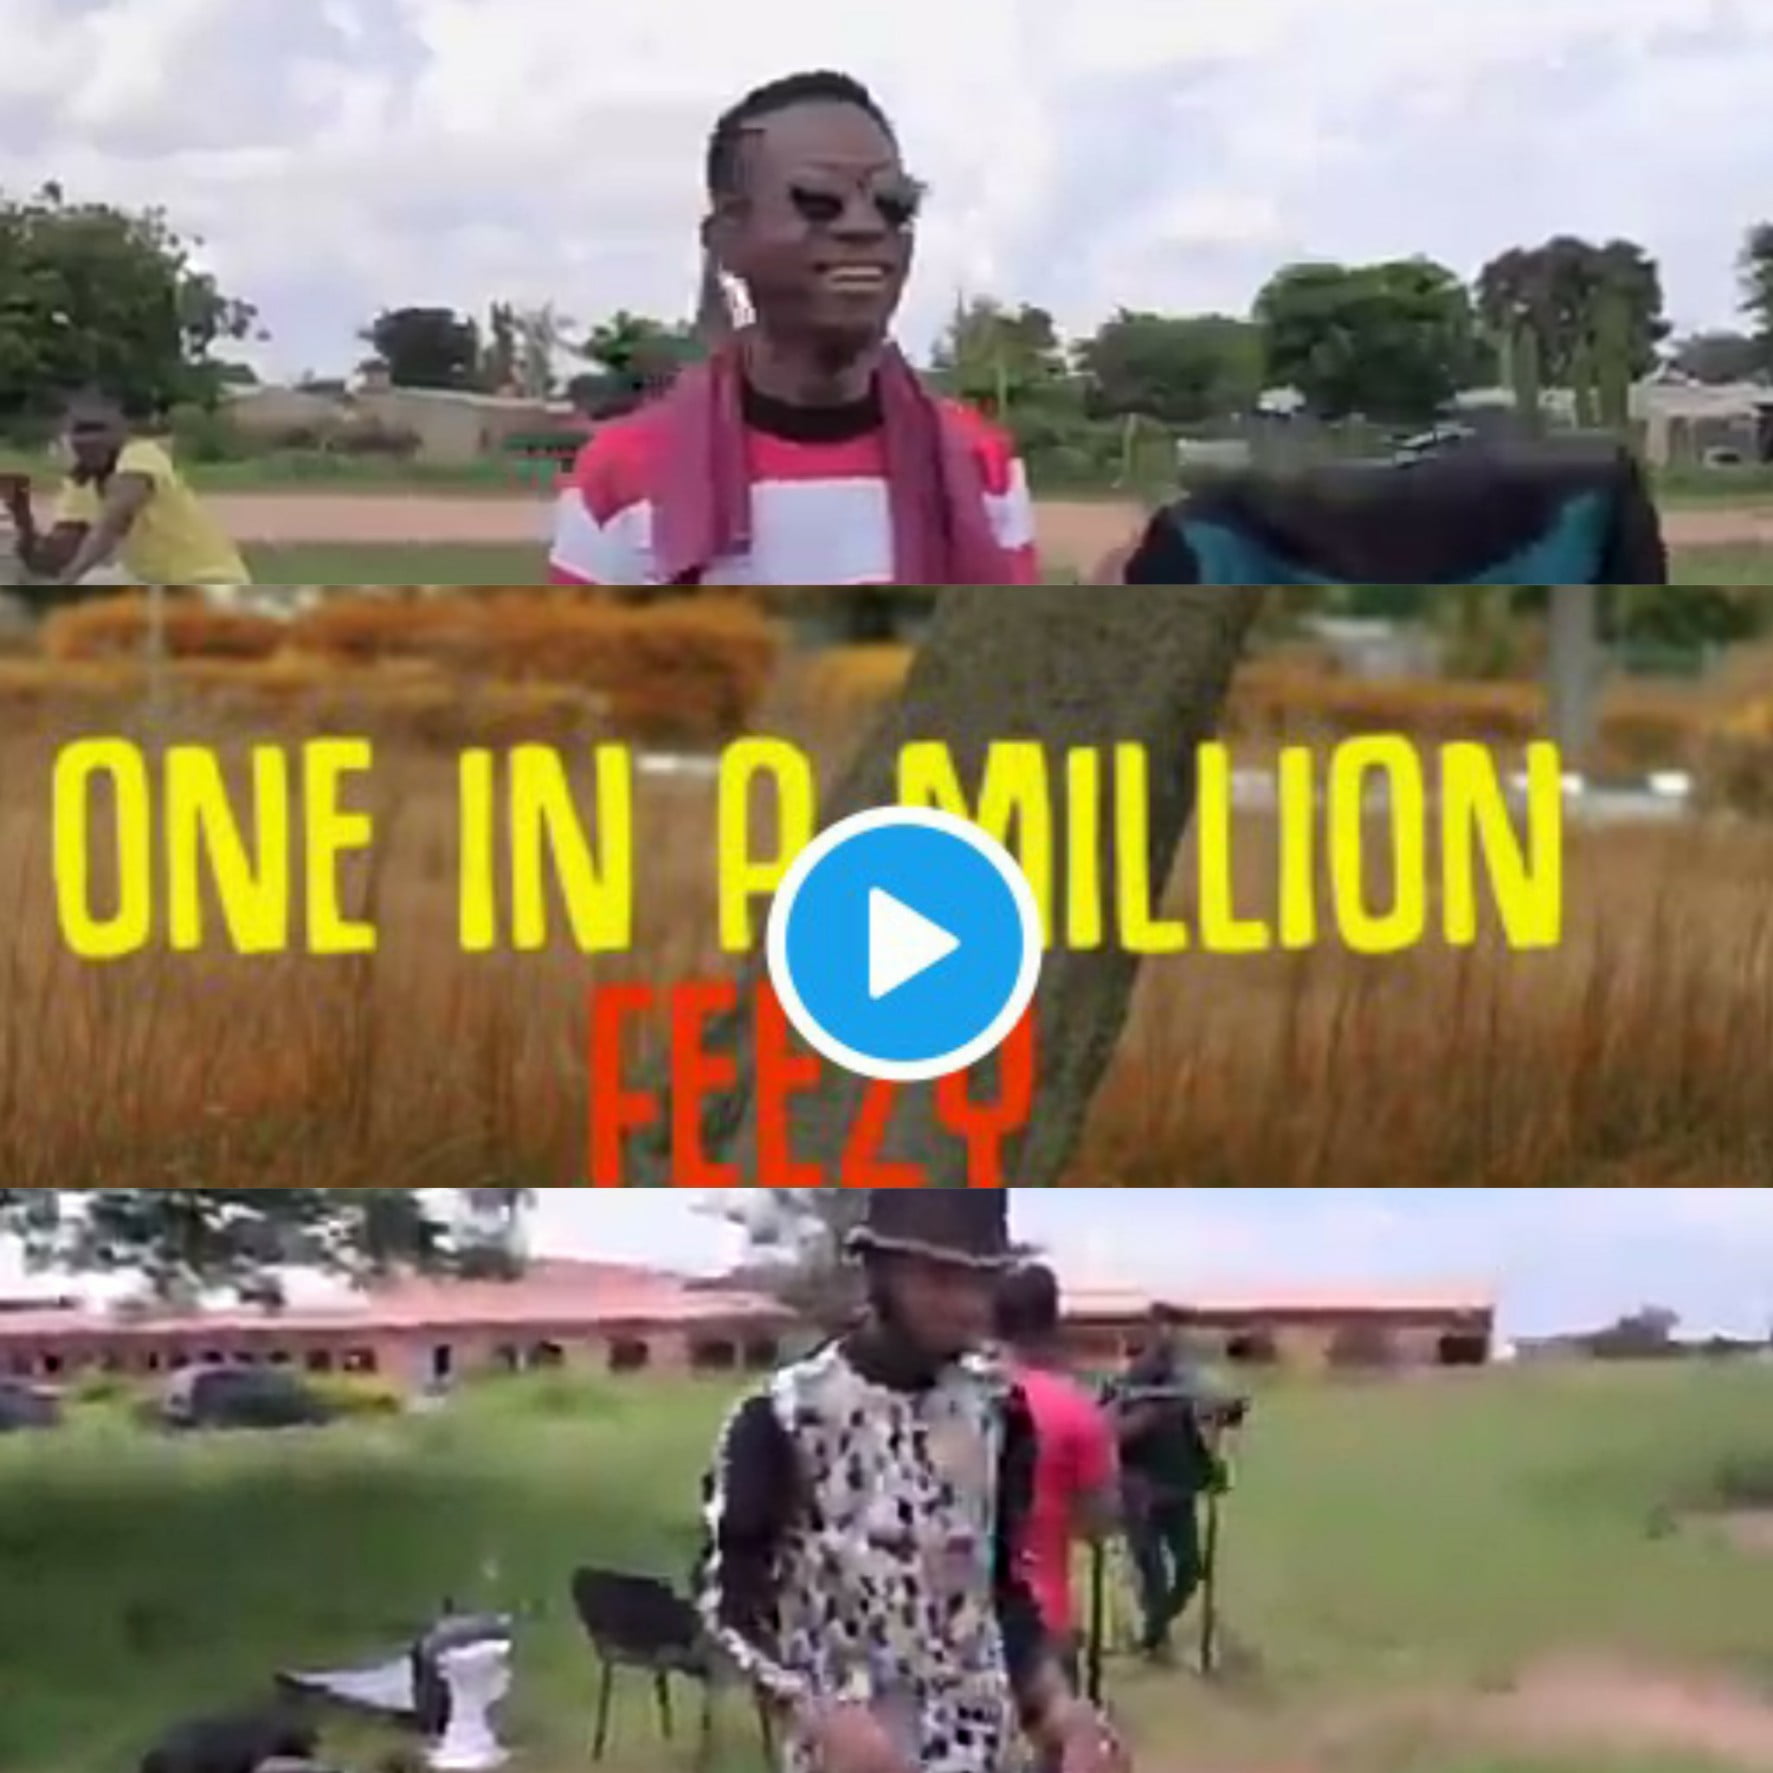 VIDEO: Feezy Behind the scene - Making of One in a Million official video [Download mp4]